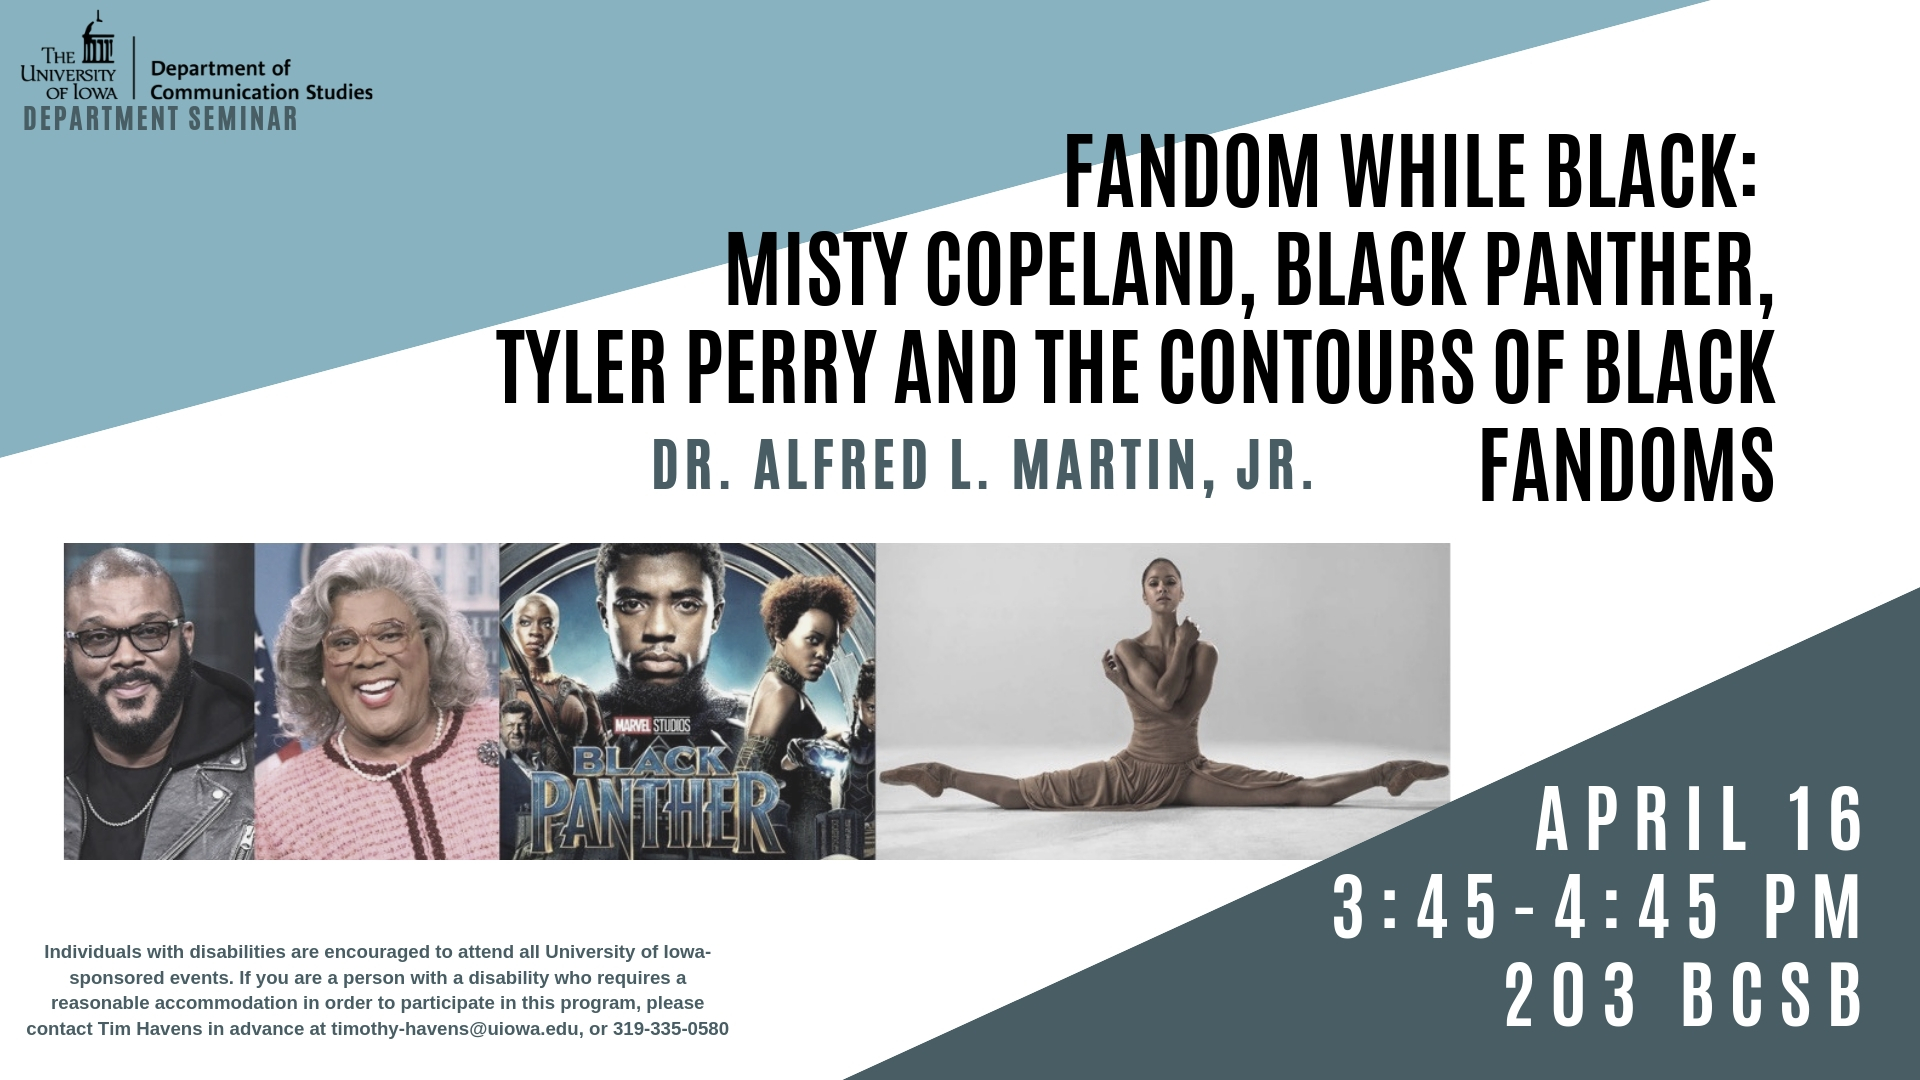 April 16, 3:45 PM, 203 BCSB: Fandom While Black: Misty Copeland, Black Panther, Tyler Perry and the Contours of Black Fandom - Dr. Alfred L. Martin Jr.